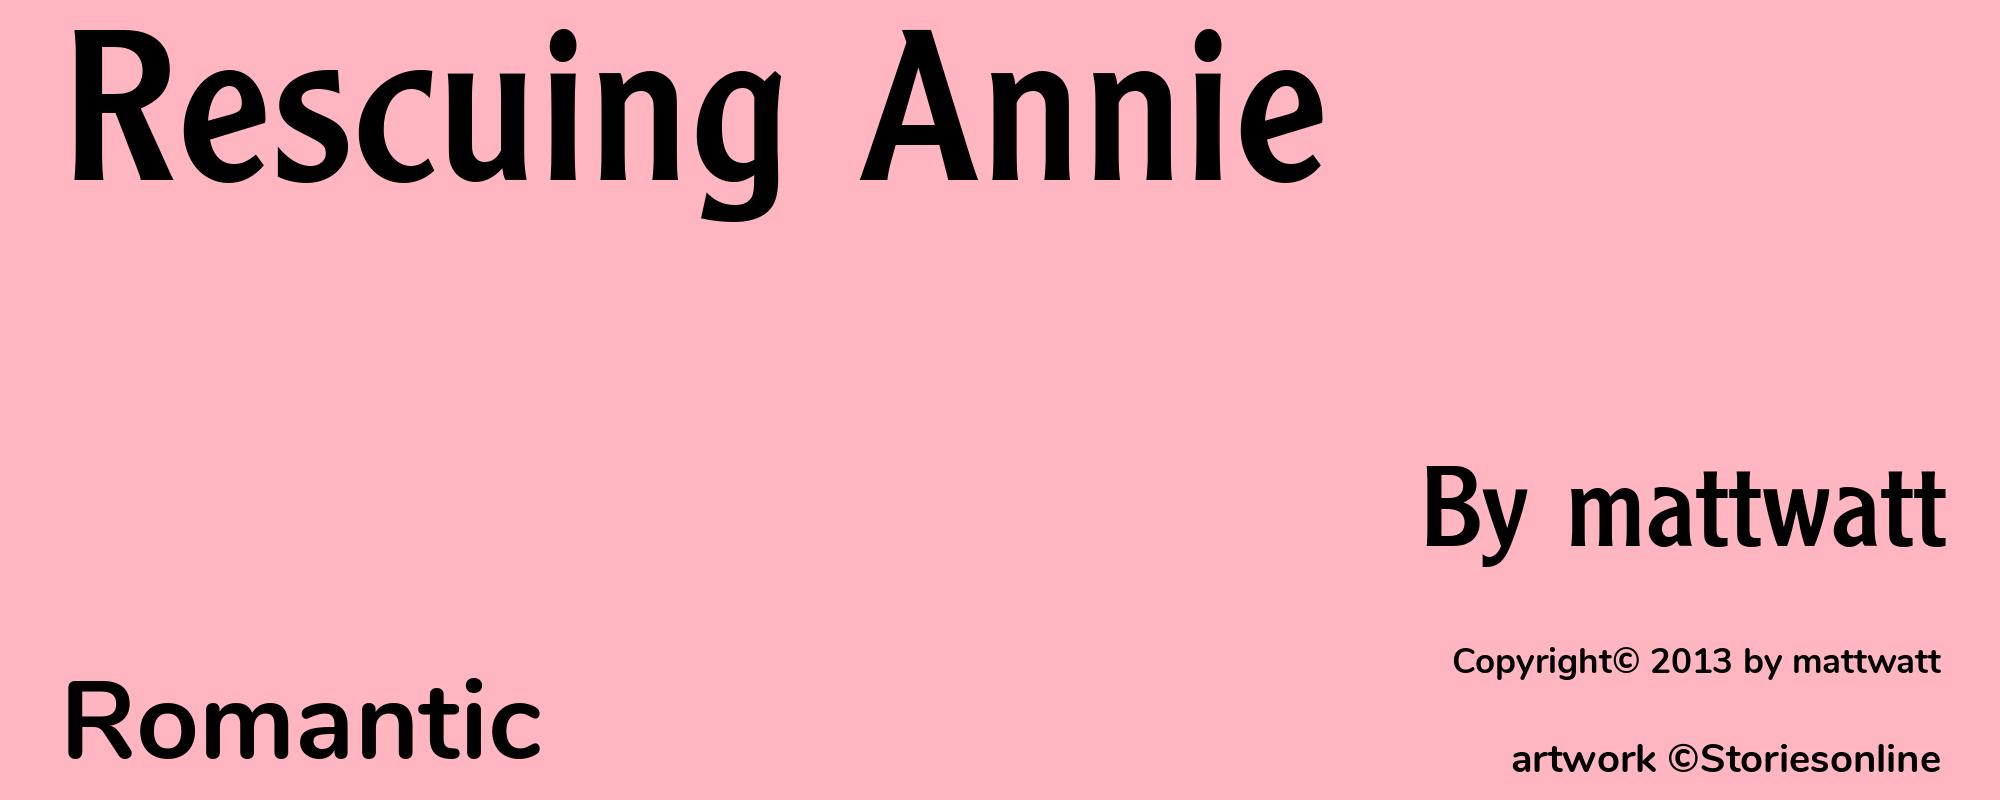 Rescuing Annie - Cover